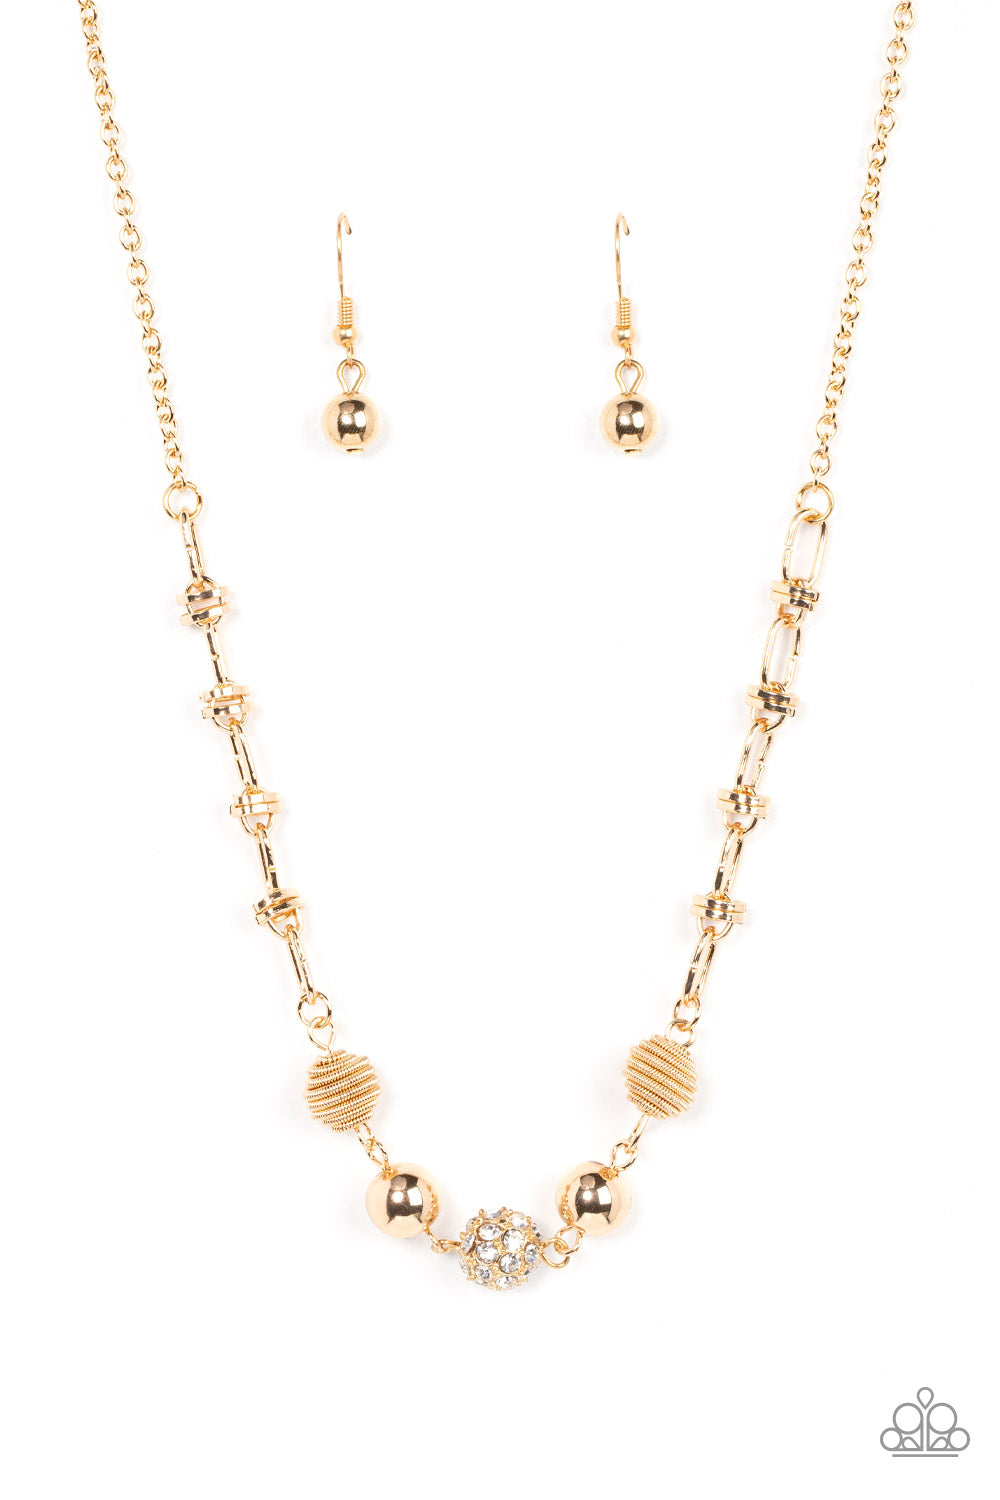 Taunting Twinkle - Gold Beads and White Rhinestone Necklace - Paparazzi Accessories